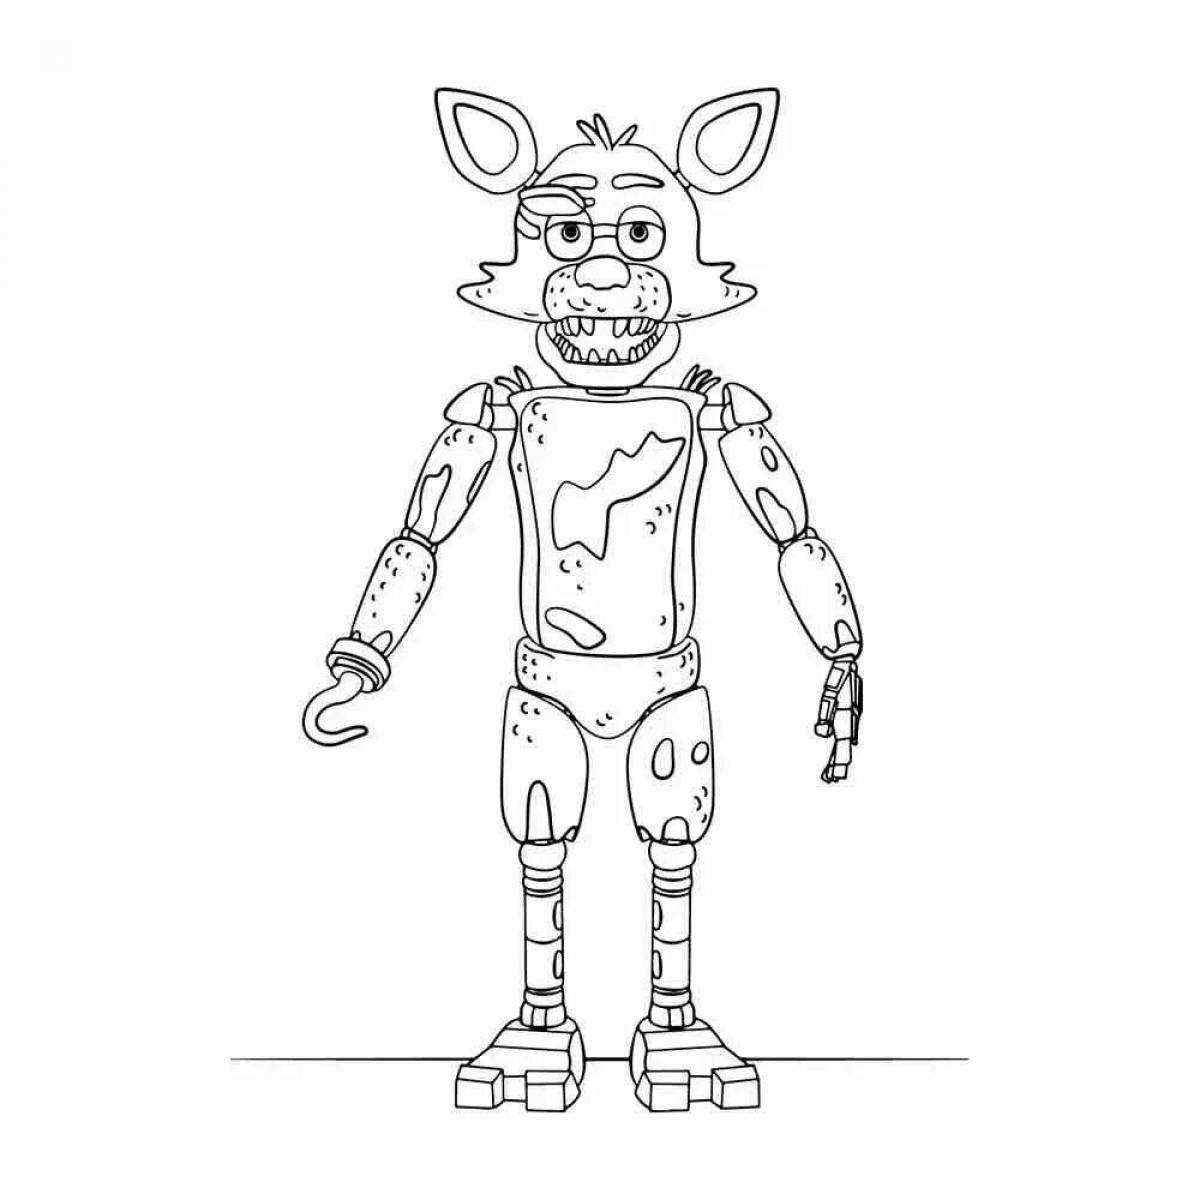 Animated freddy robot coloring page